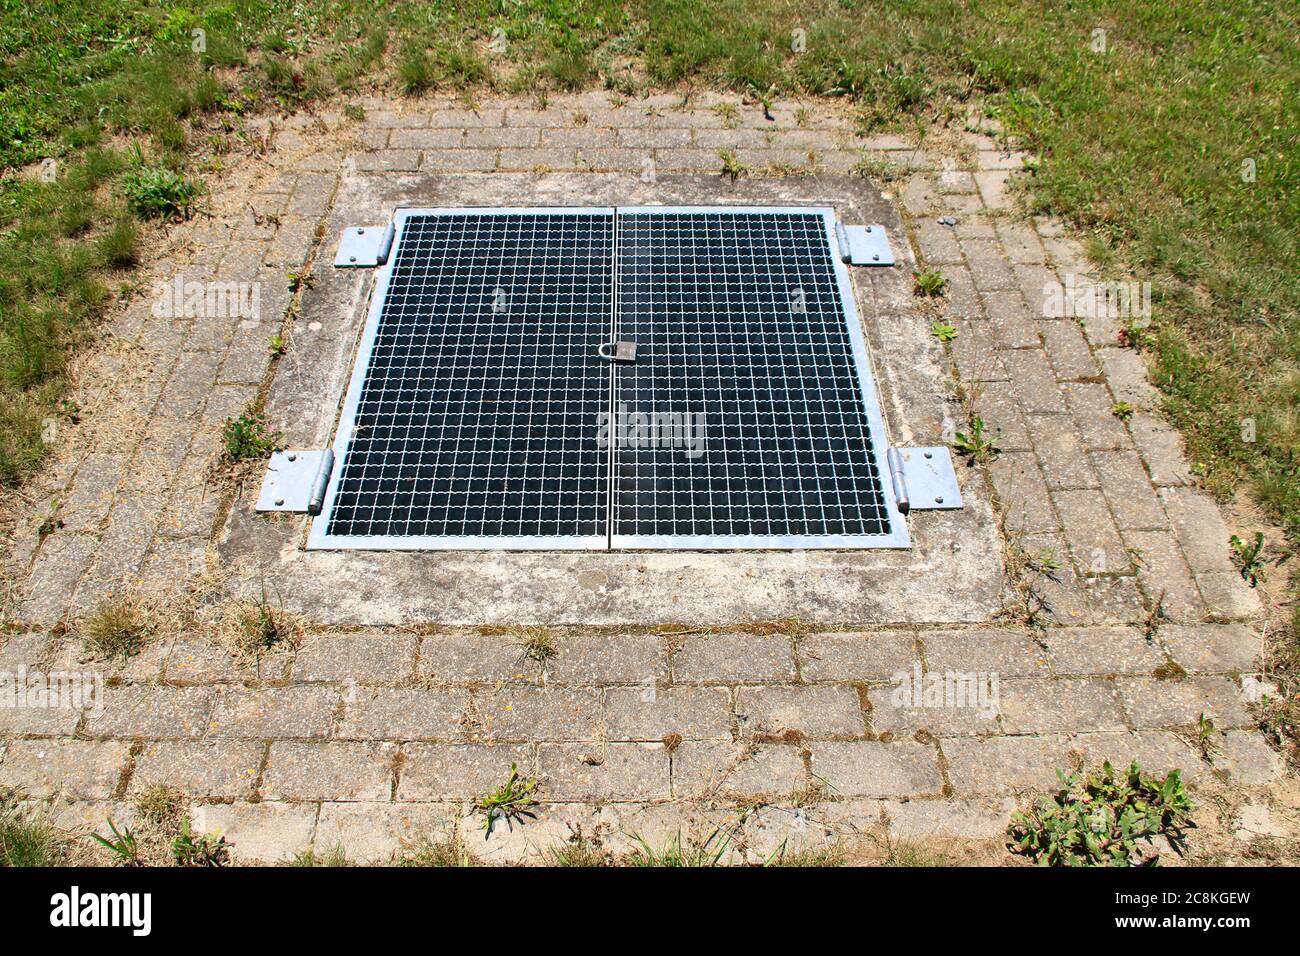 Metal grille for entering a rainwater retention basin was secured with a lock Stock Photo